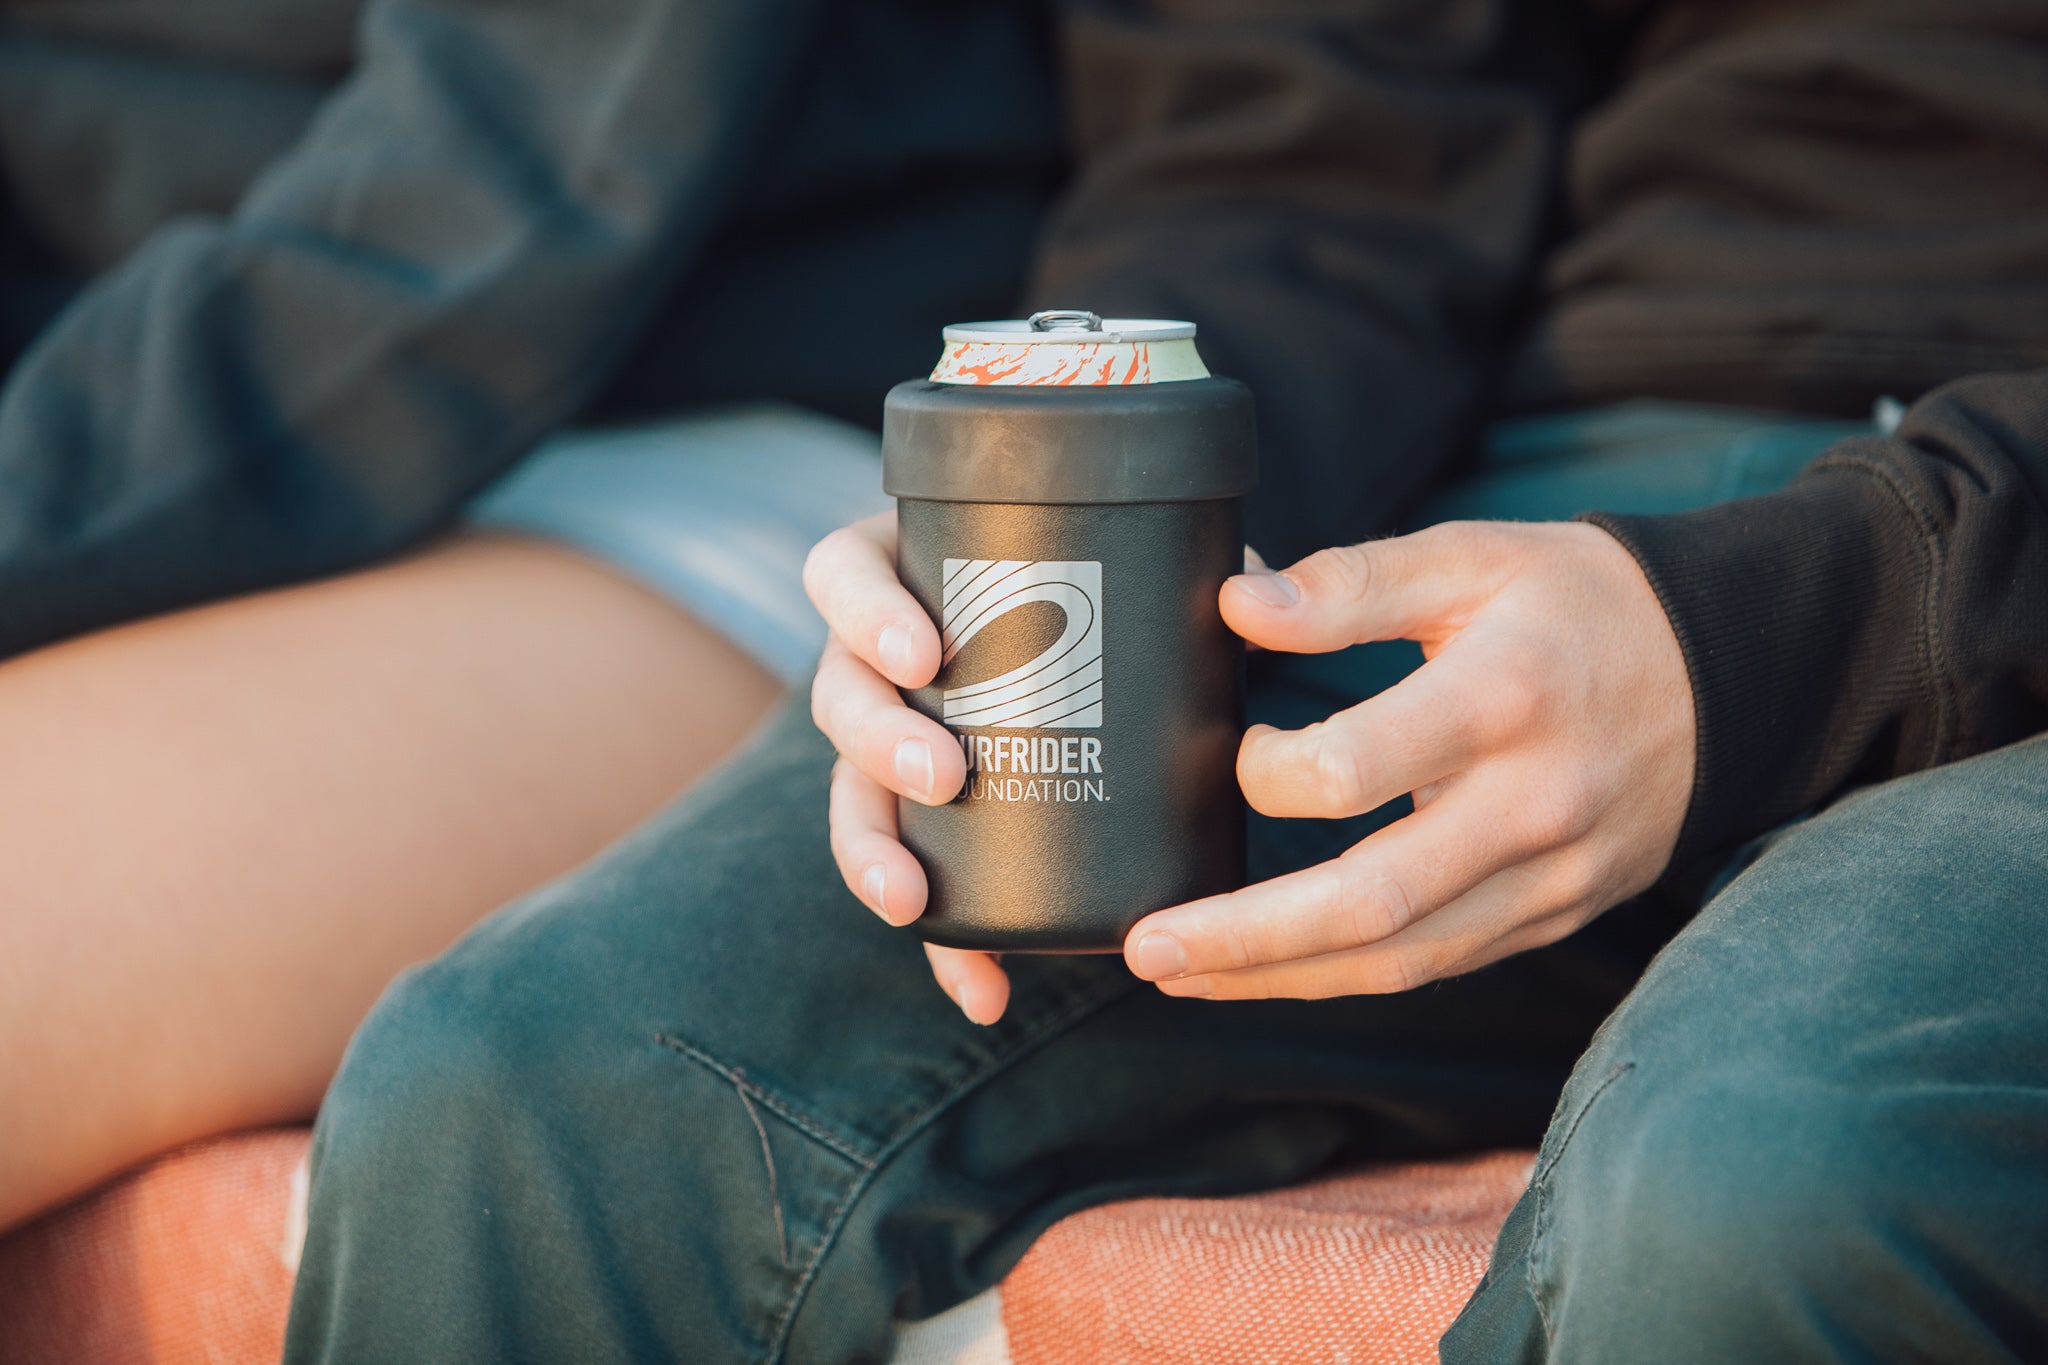 Hydro Flask Cooler Cup